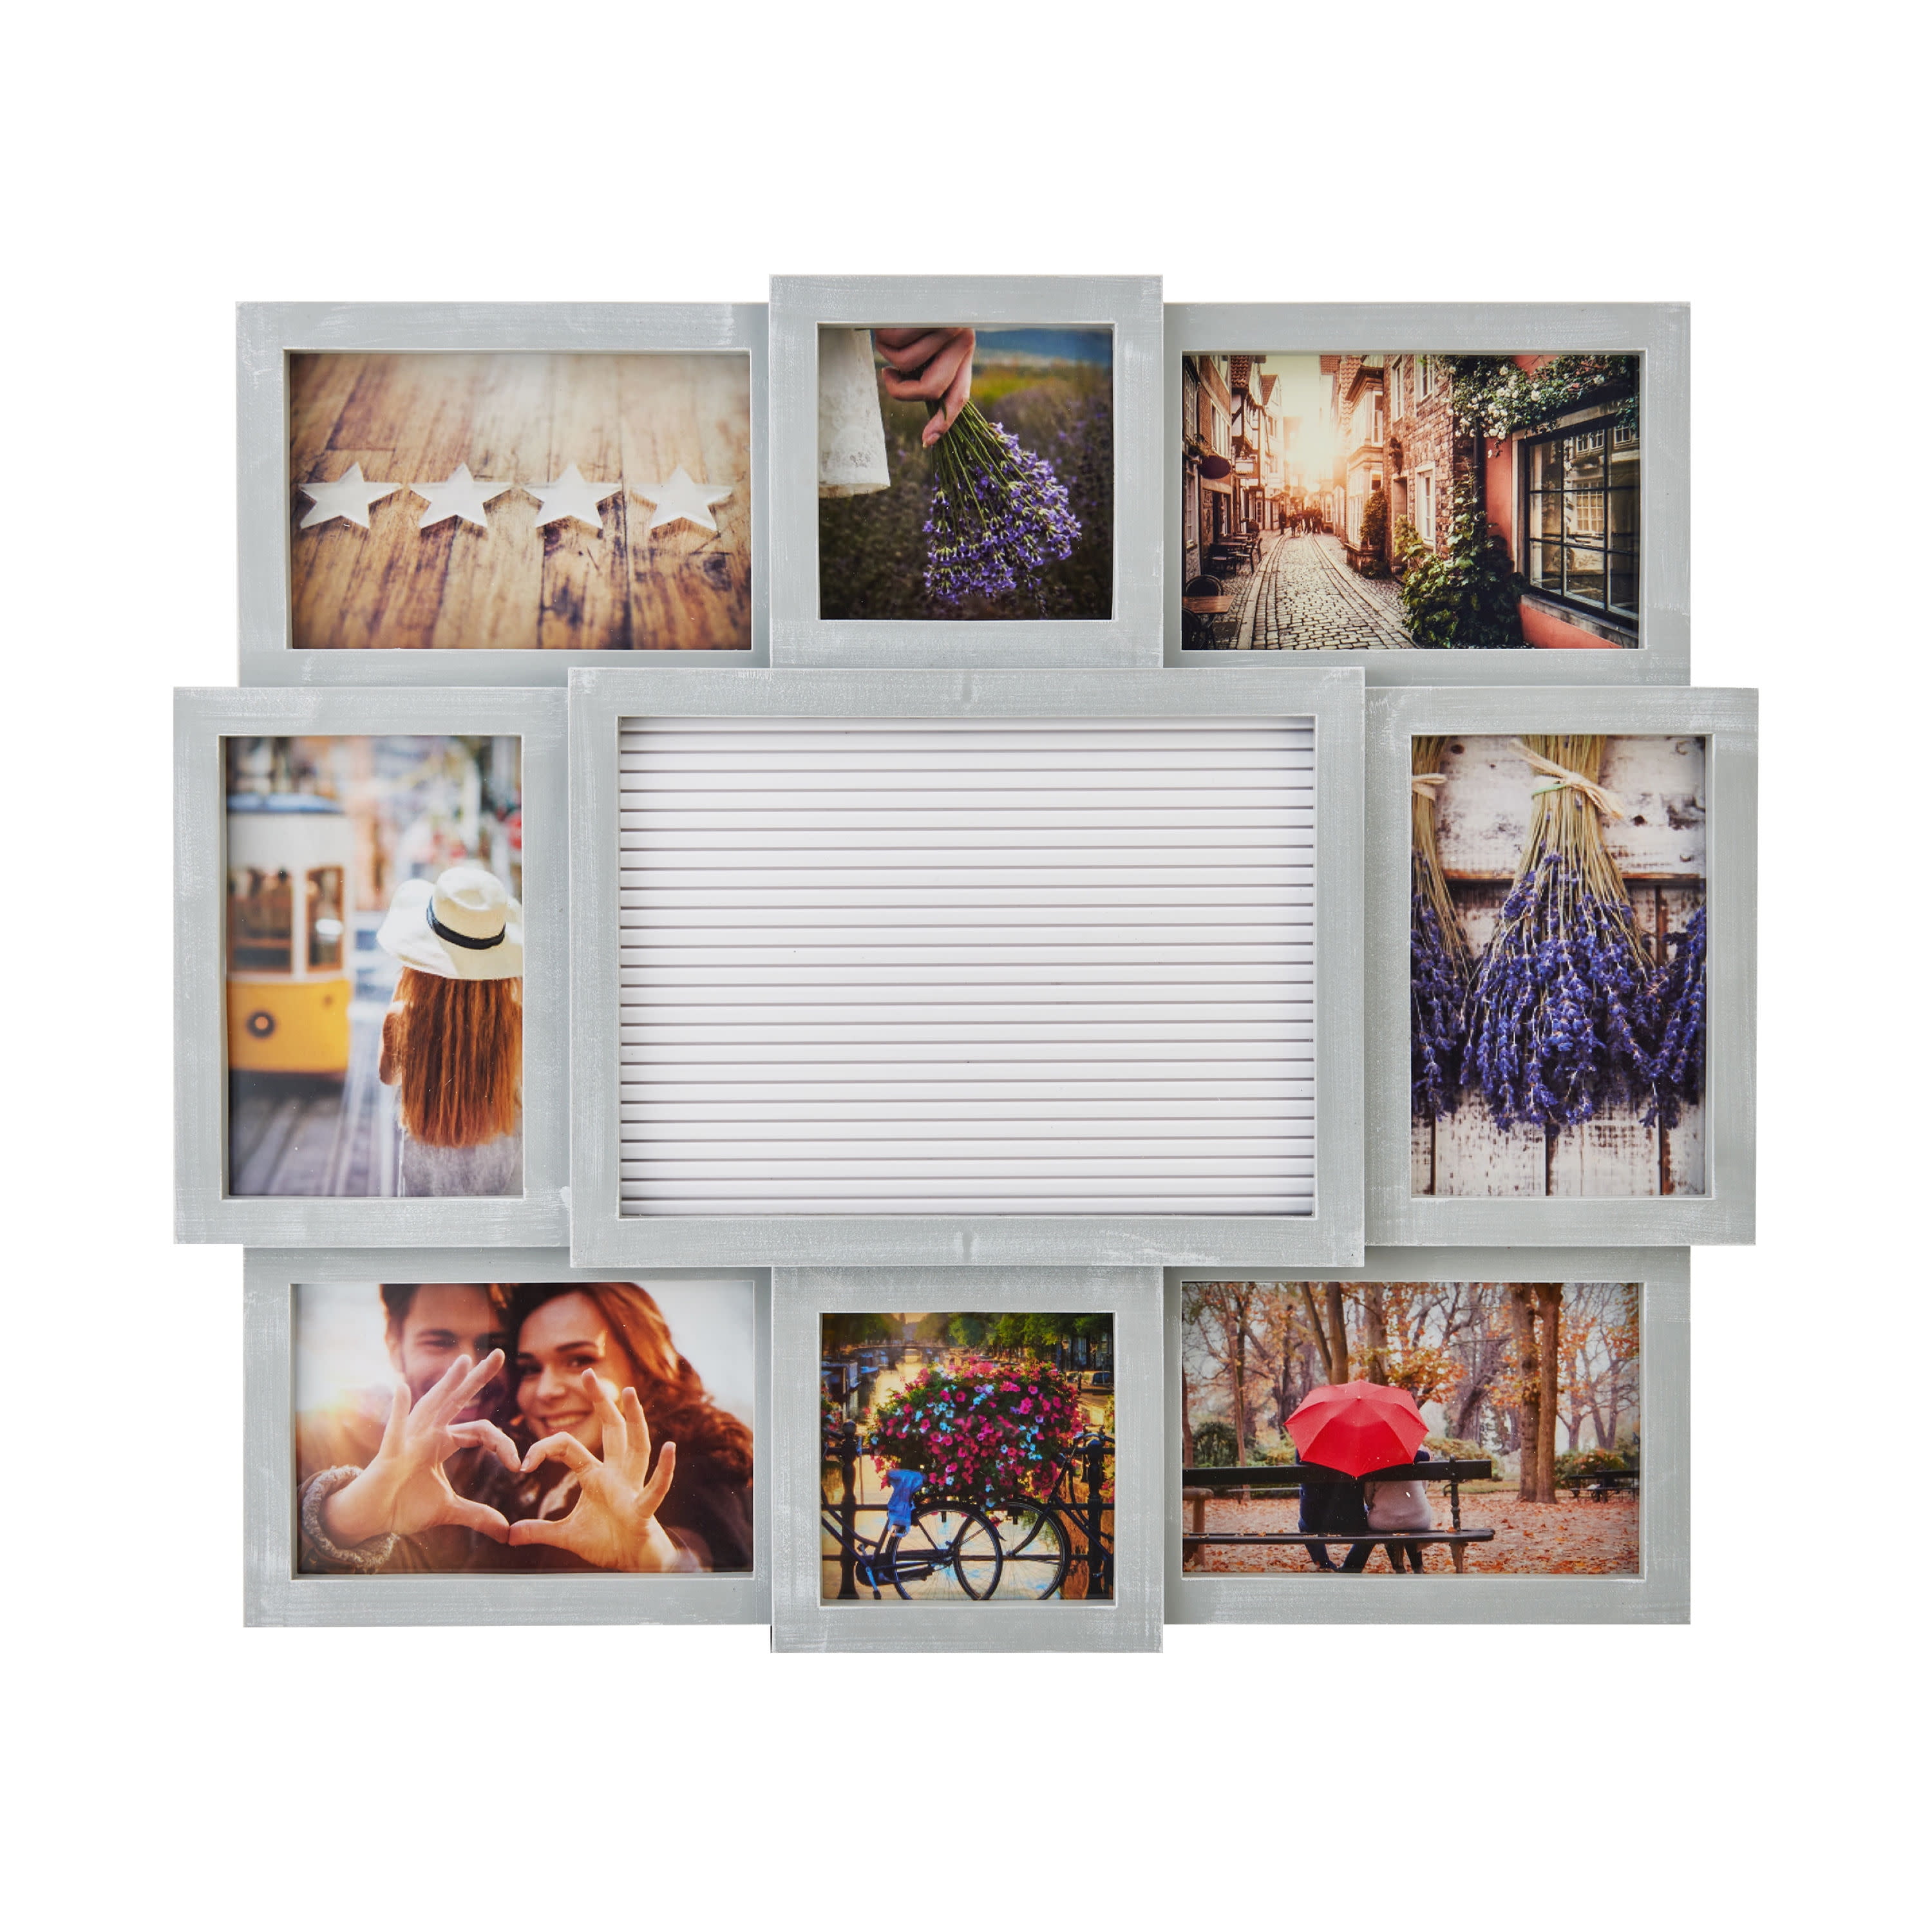 #Black 19-Inch-by-17-Inch MELANNCO Customizable Letter Board with 8-Opening Photo Collage